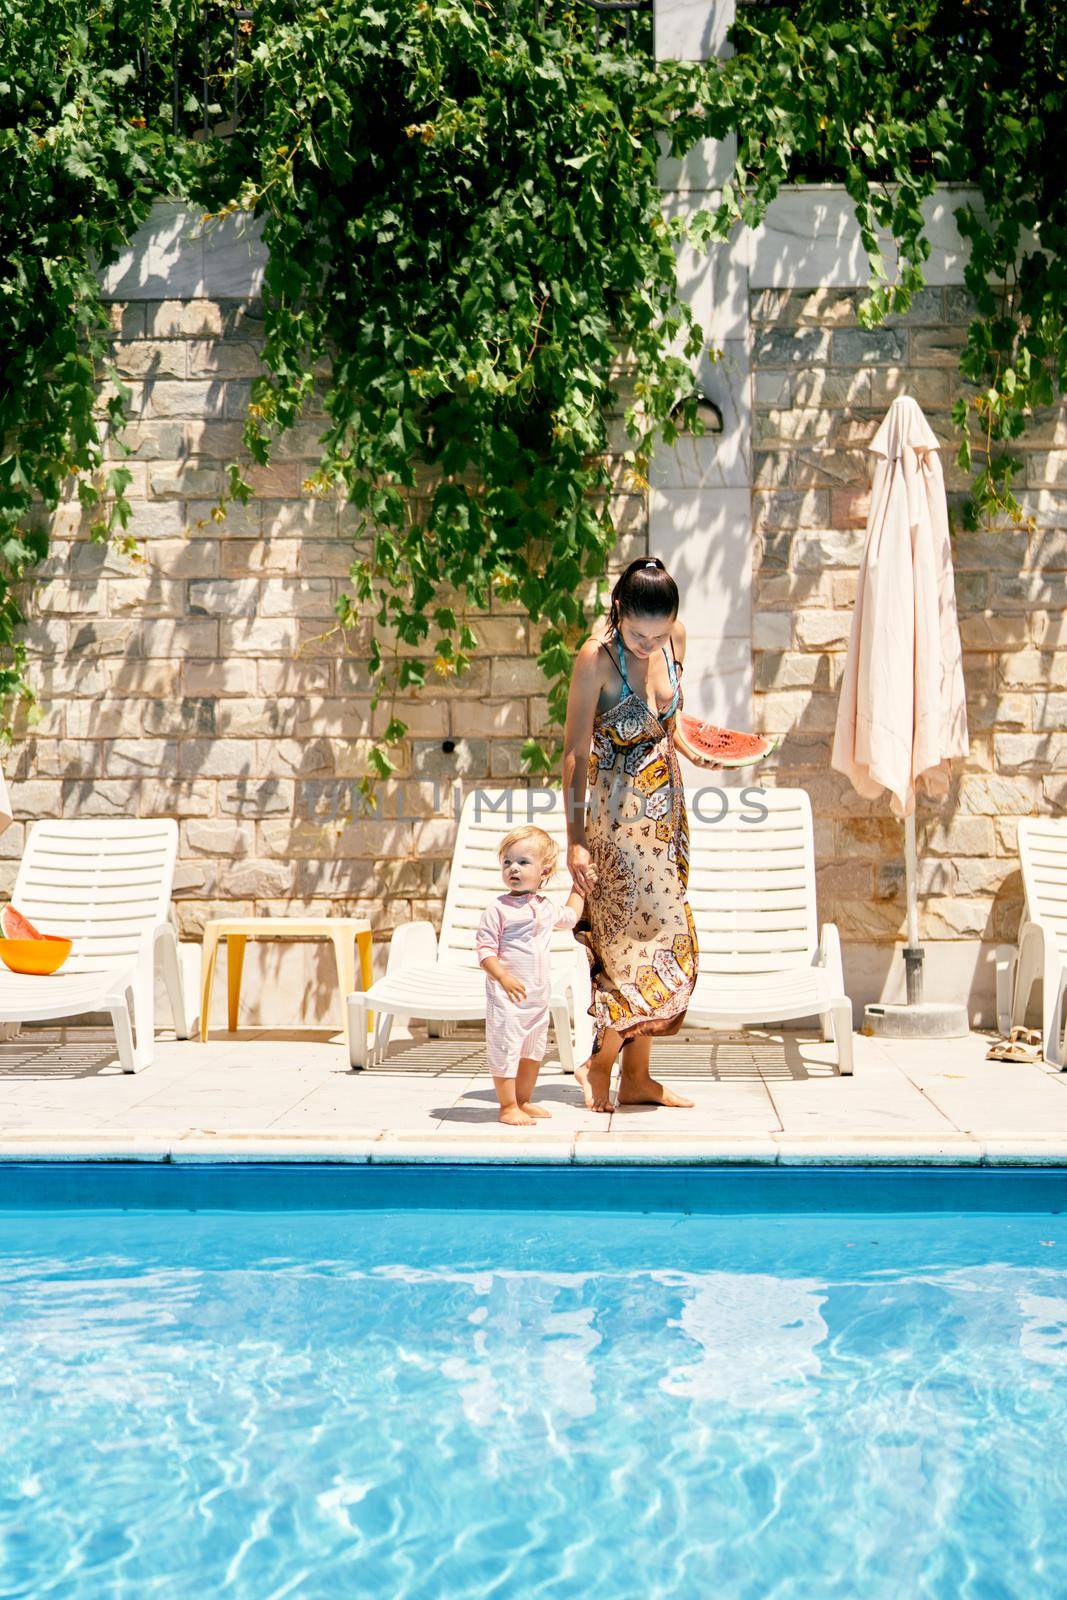 Mom with a watermelon in her hand leads a little girl to a sun lounger by the pool by Nadtochiy